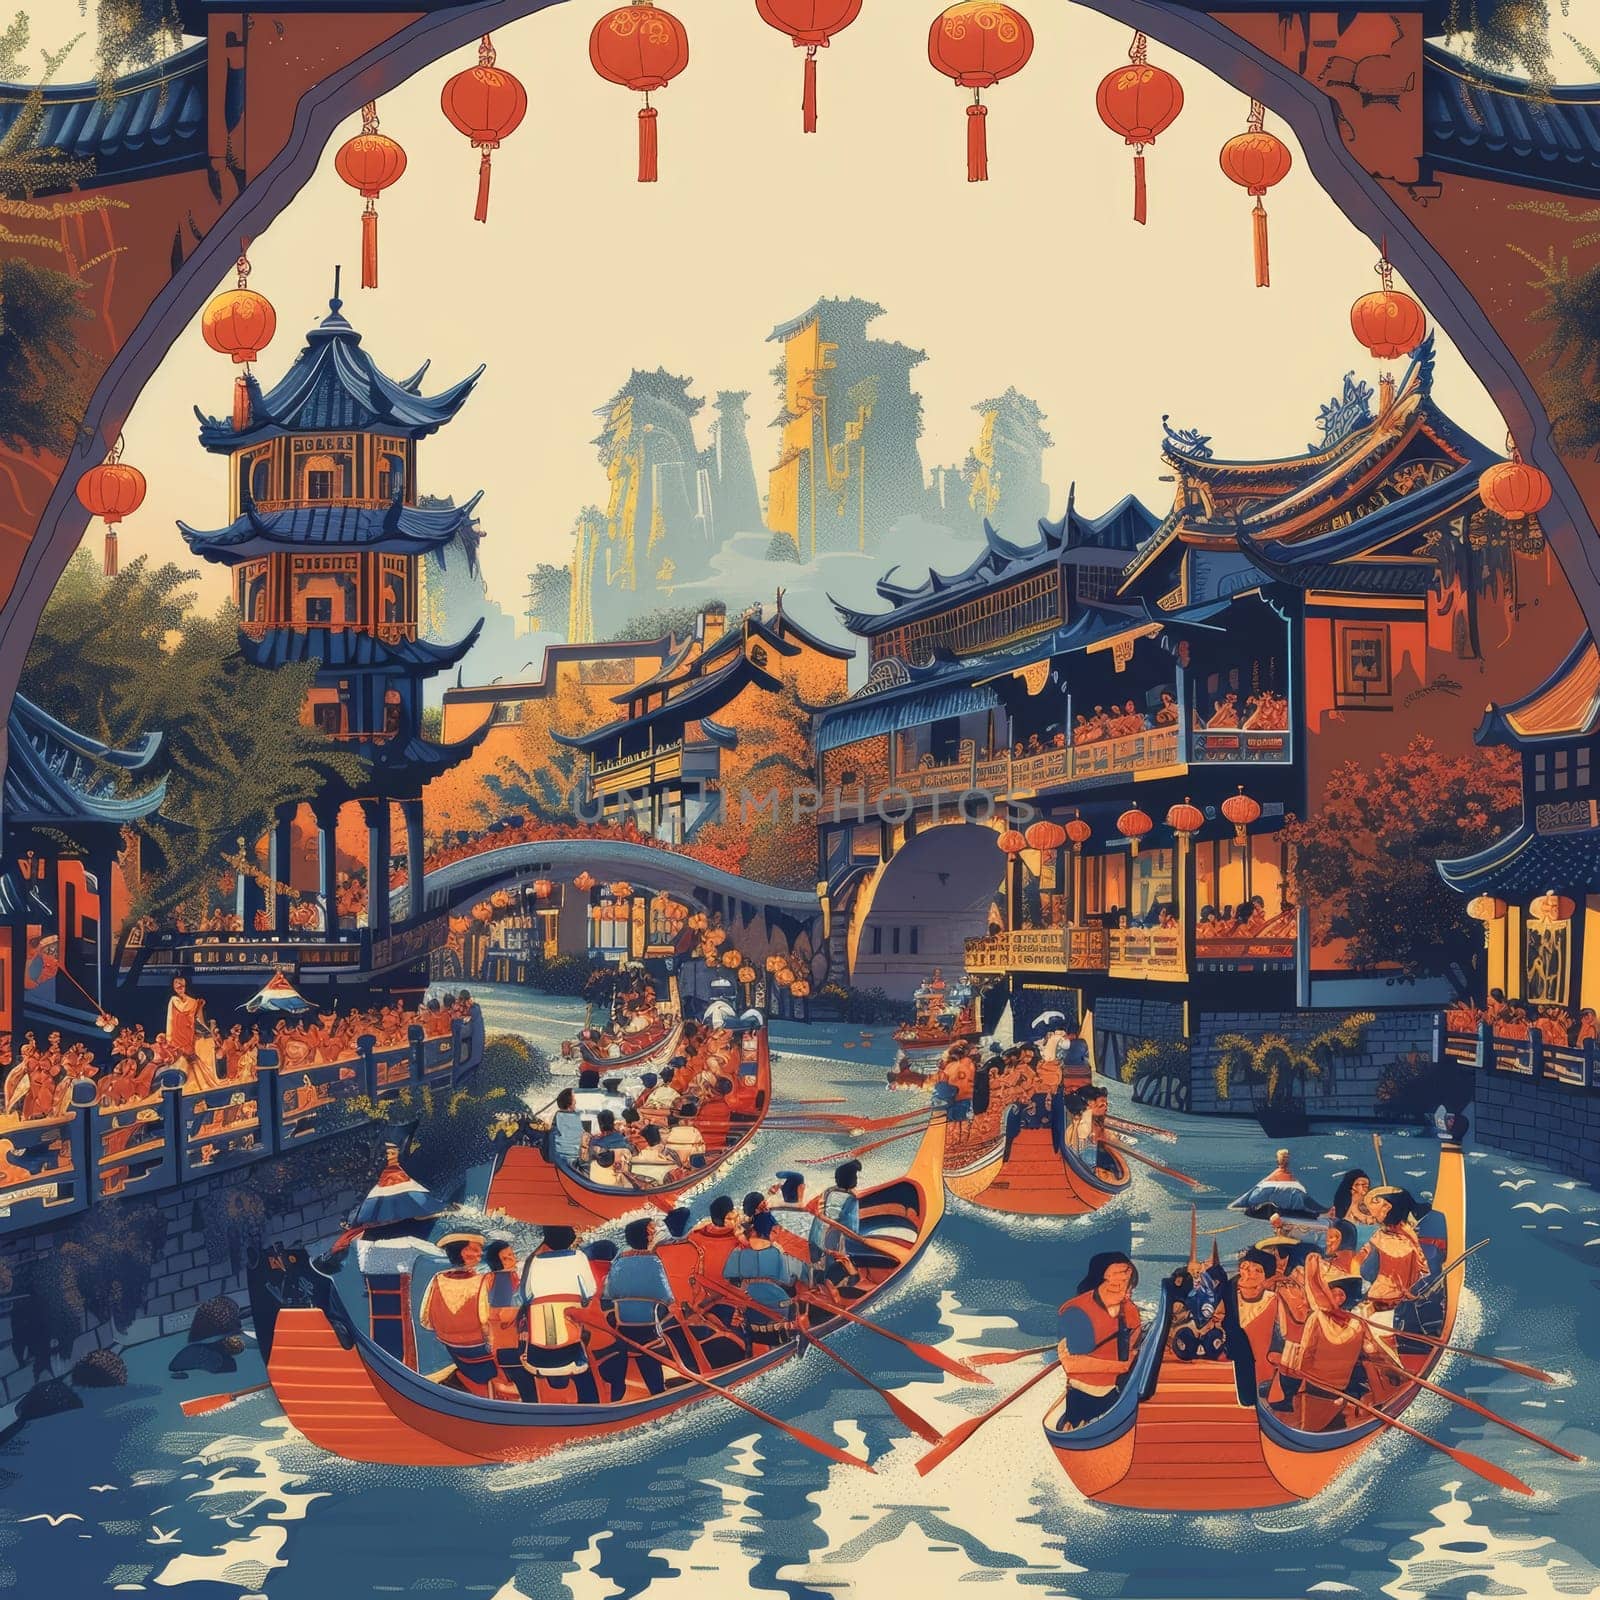 This vibrant image captures a twilight Dragon Boat Festival, with traditional architecture and boats under a serene, lantern-lit sky